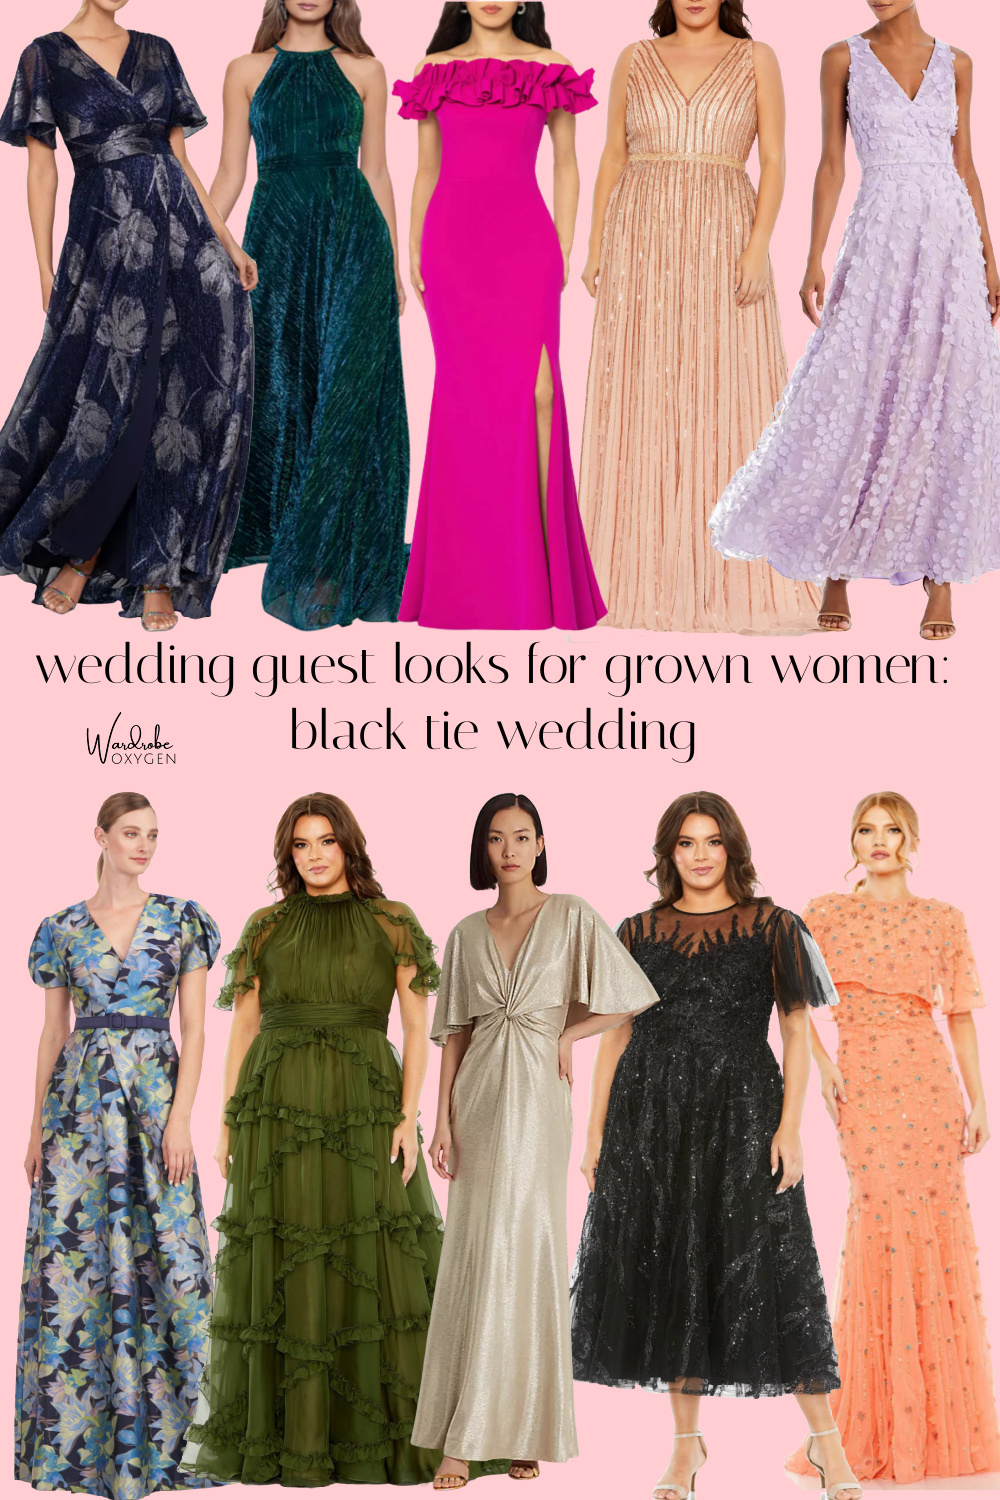 Dresses for Wedding Guests Over 40 That Are Stylish, Not Frumpy